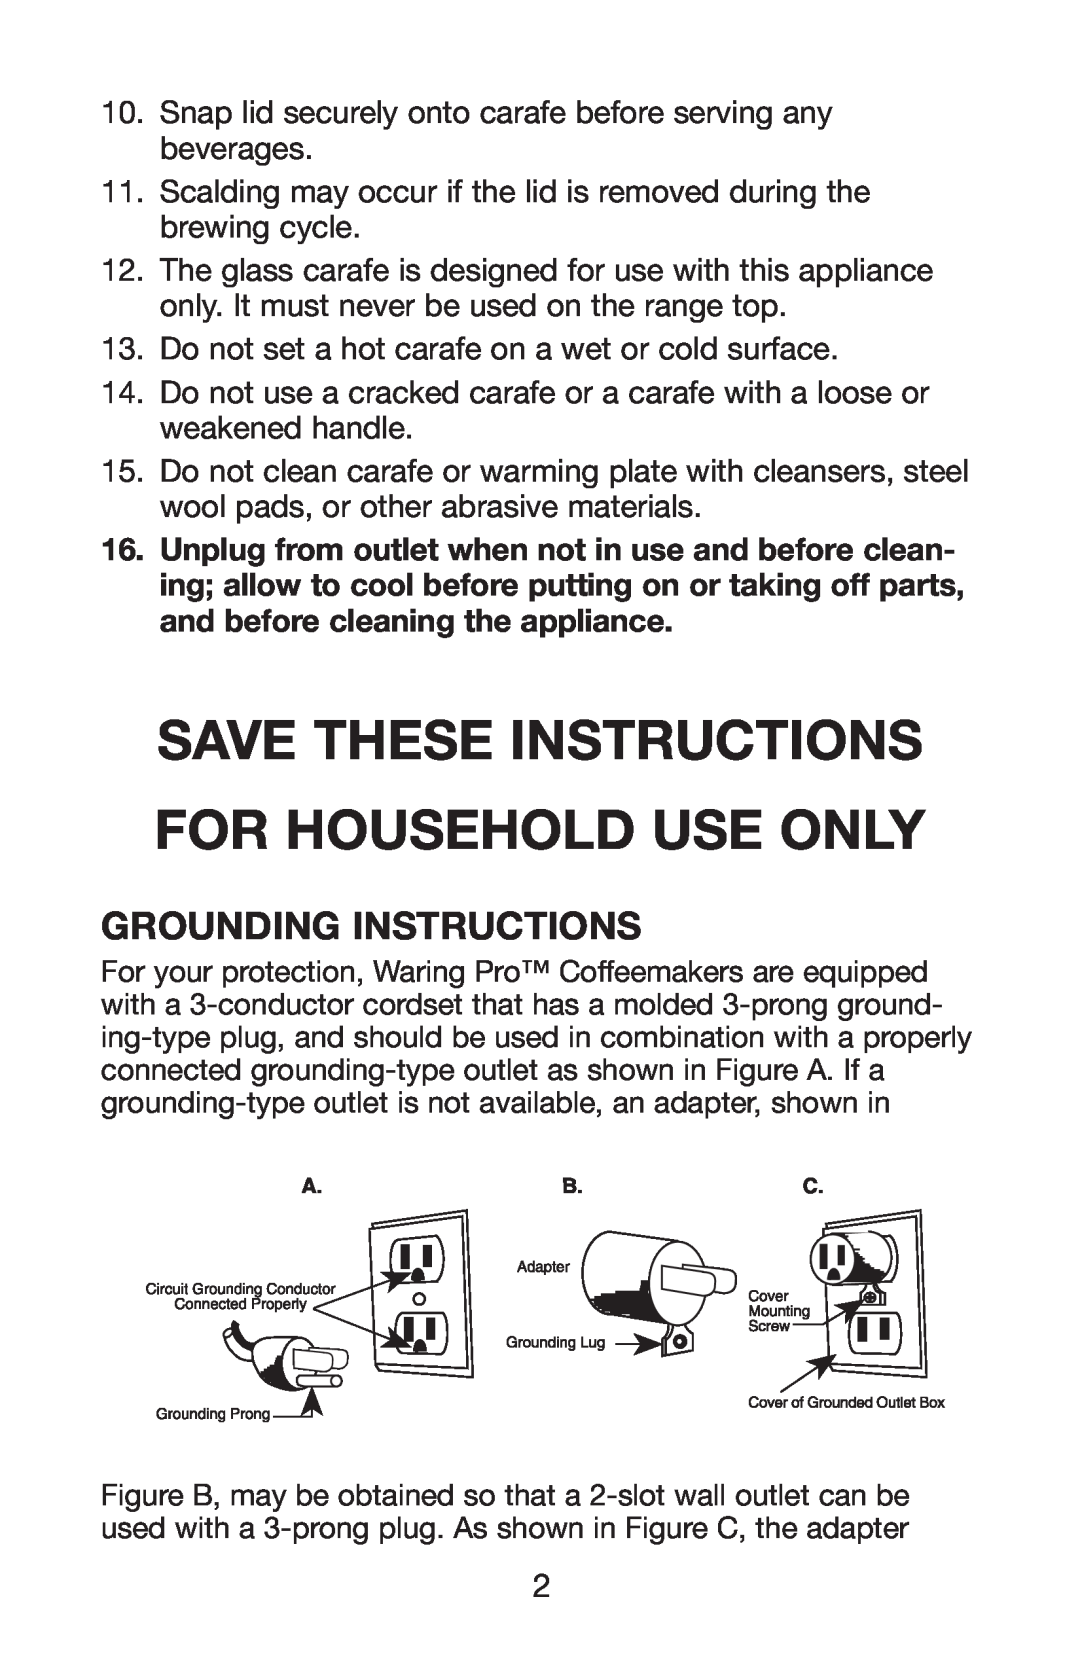 Waring WC1000 manual Grounding Instructions, Save These Instructions For Household Use Only 